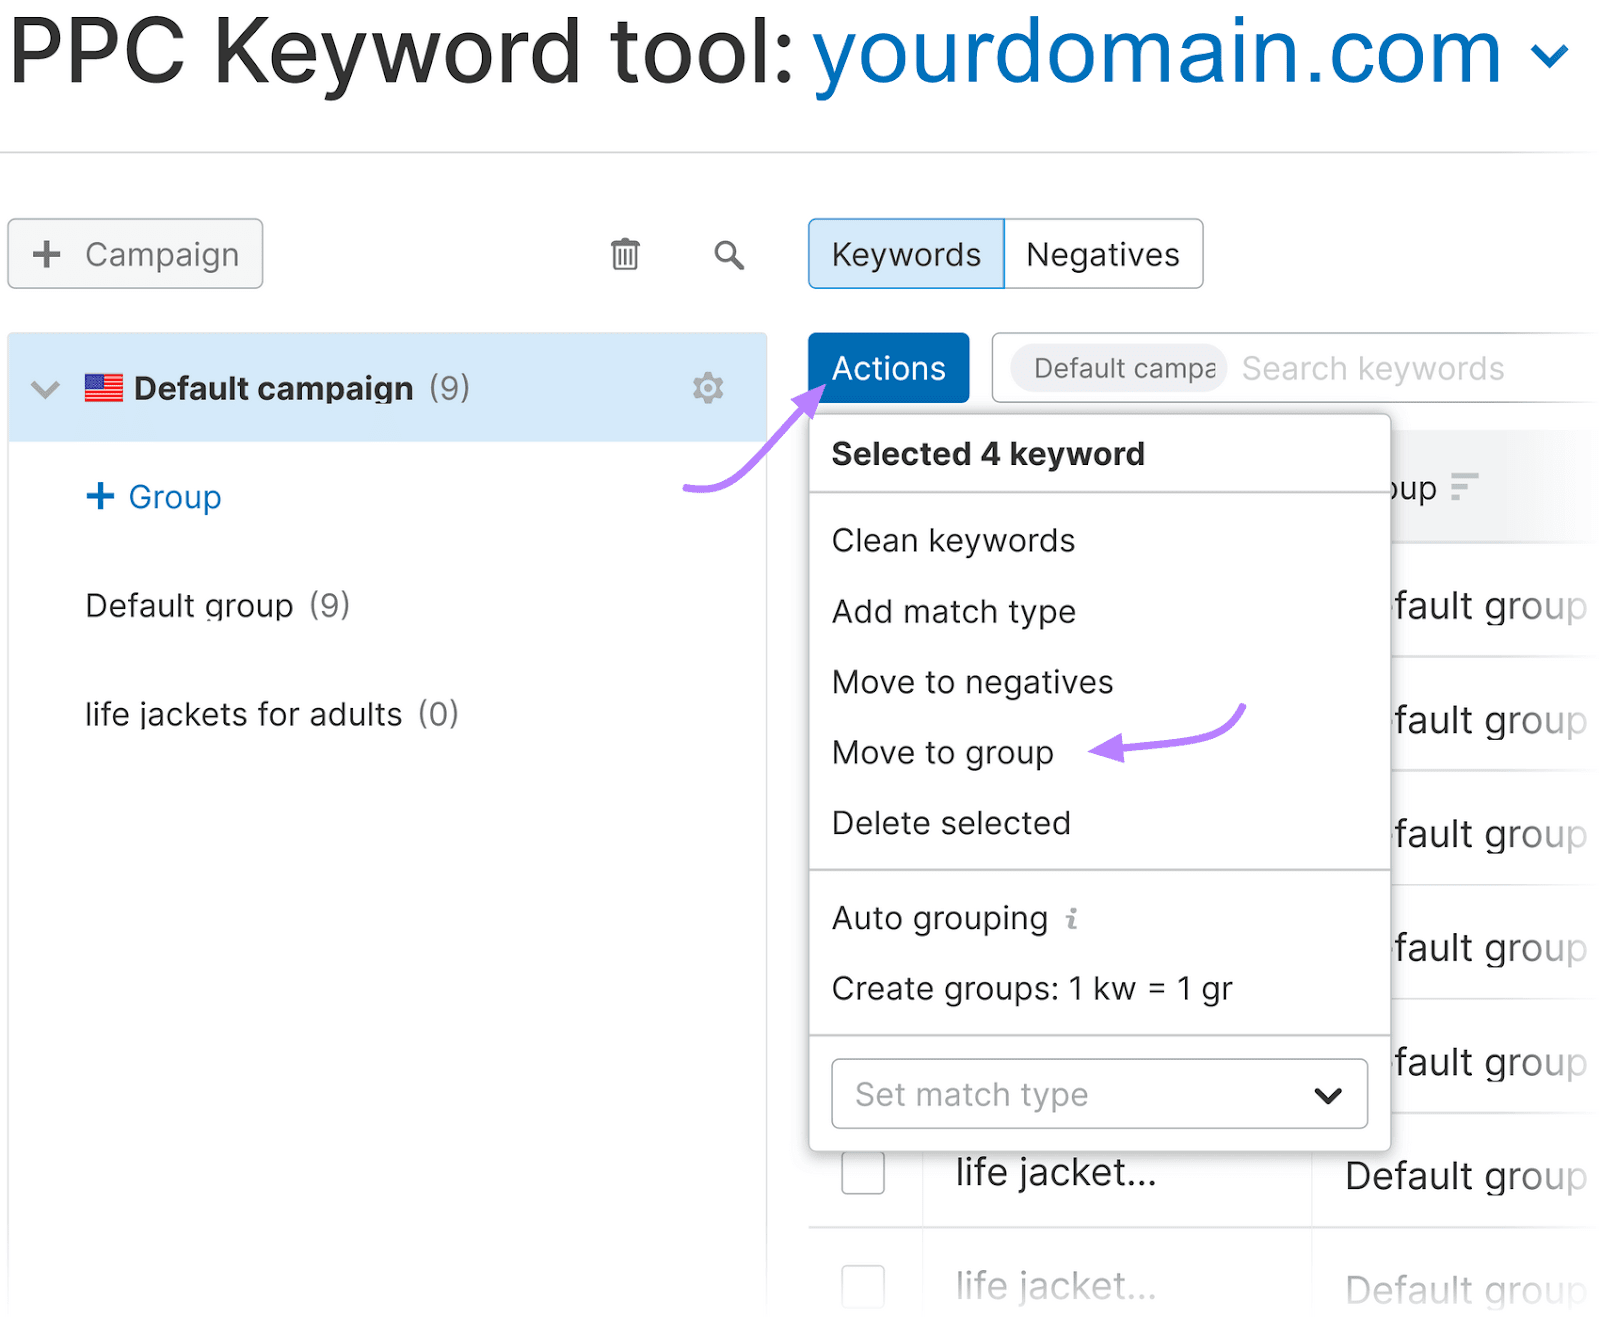 PPC Keyword Tool showing an "Actions" submenu, with a focus on the "Move the group" option.